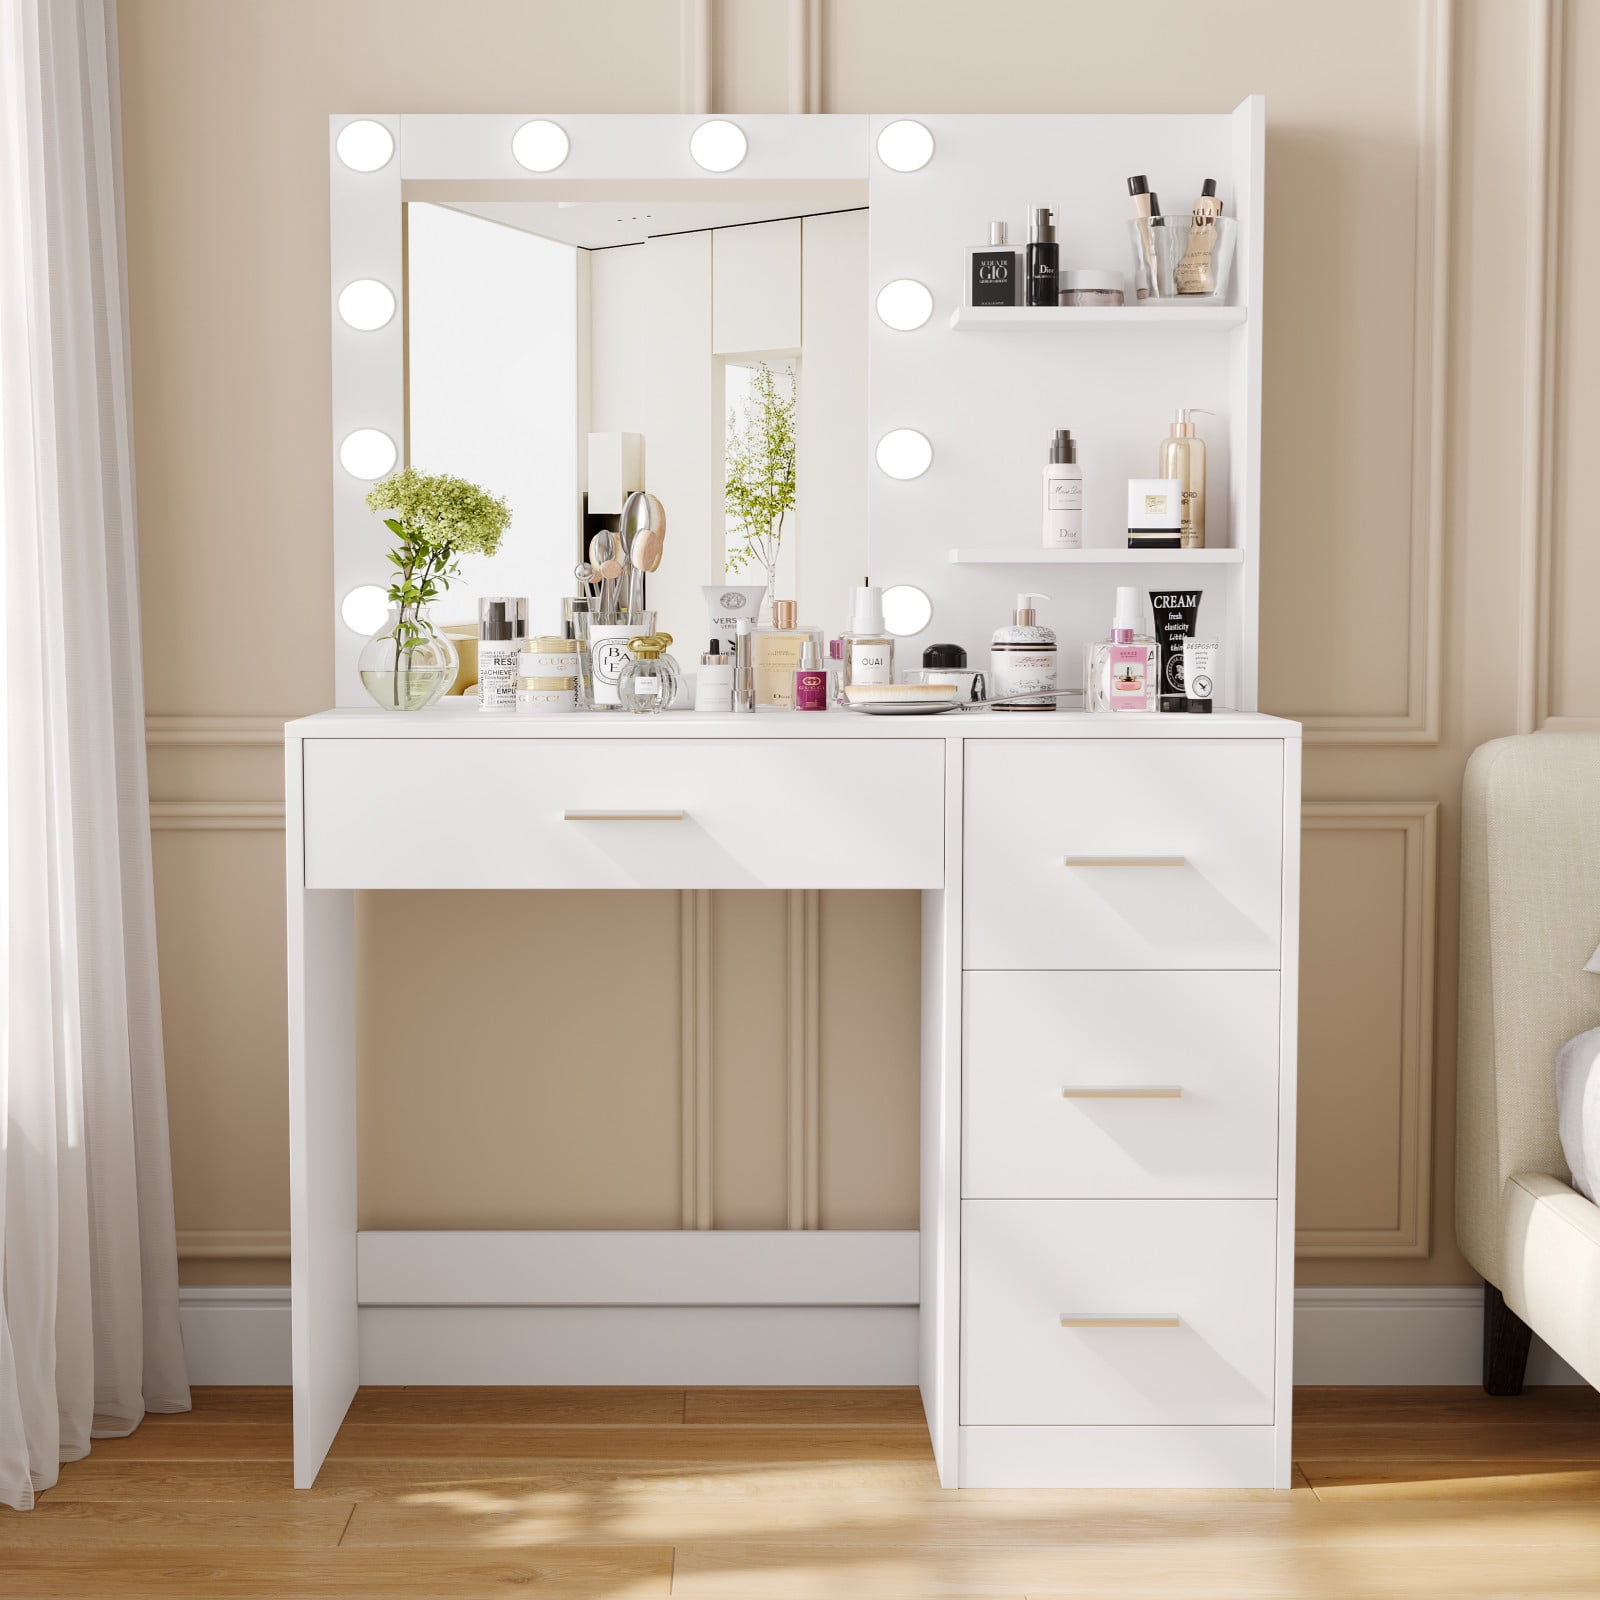 TOLEAD Vanity Set, Makeup Vanity Desk with LED Lights and Mirror,Rustic  Elegant Dressing Table with 2 Drawers & Open Storage Shelves for Women  Girls